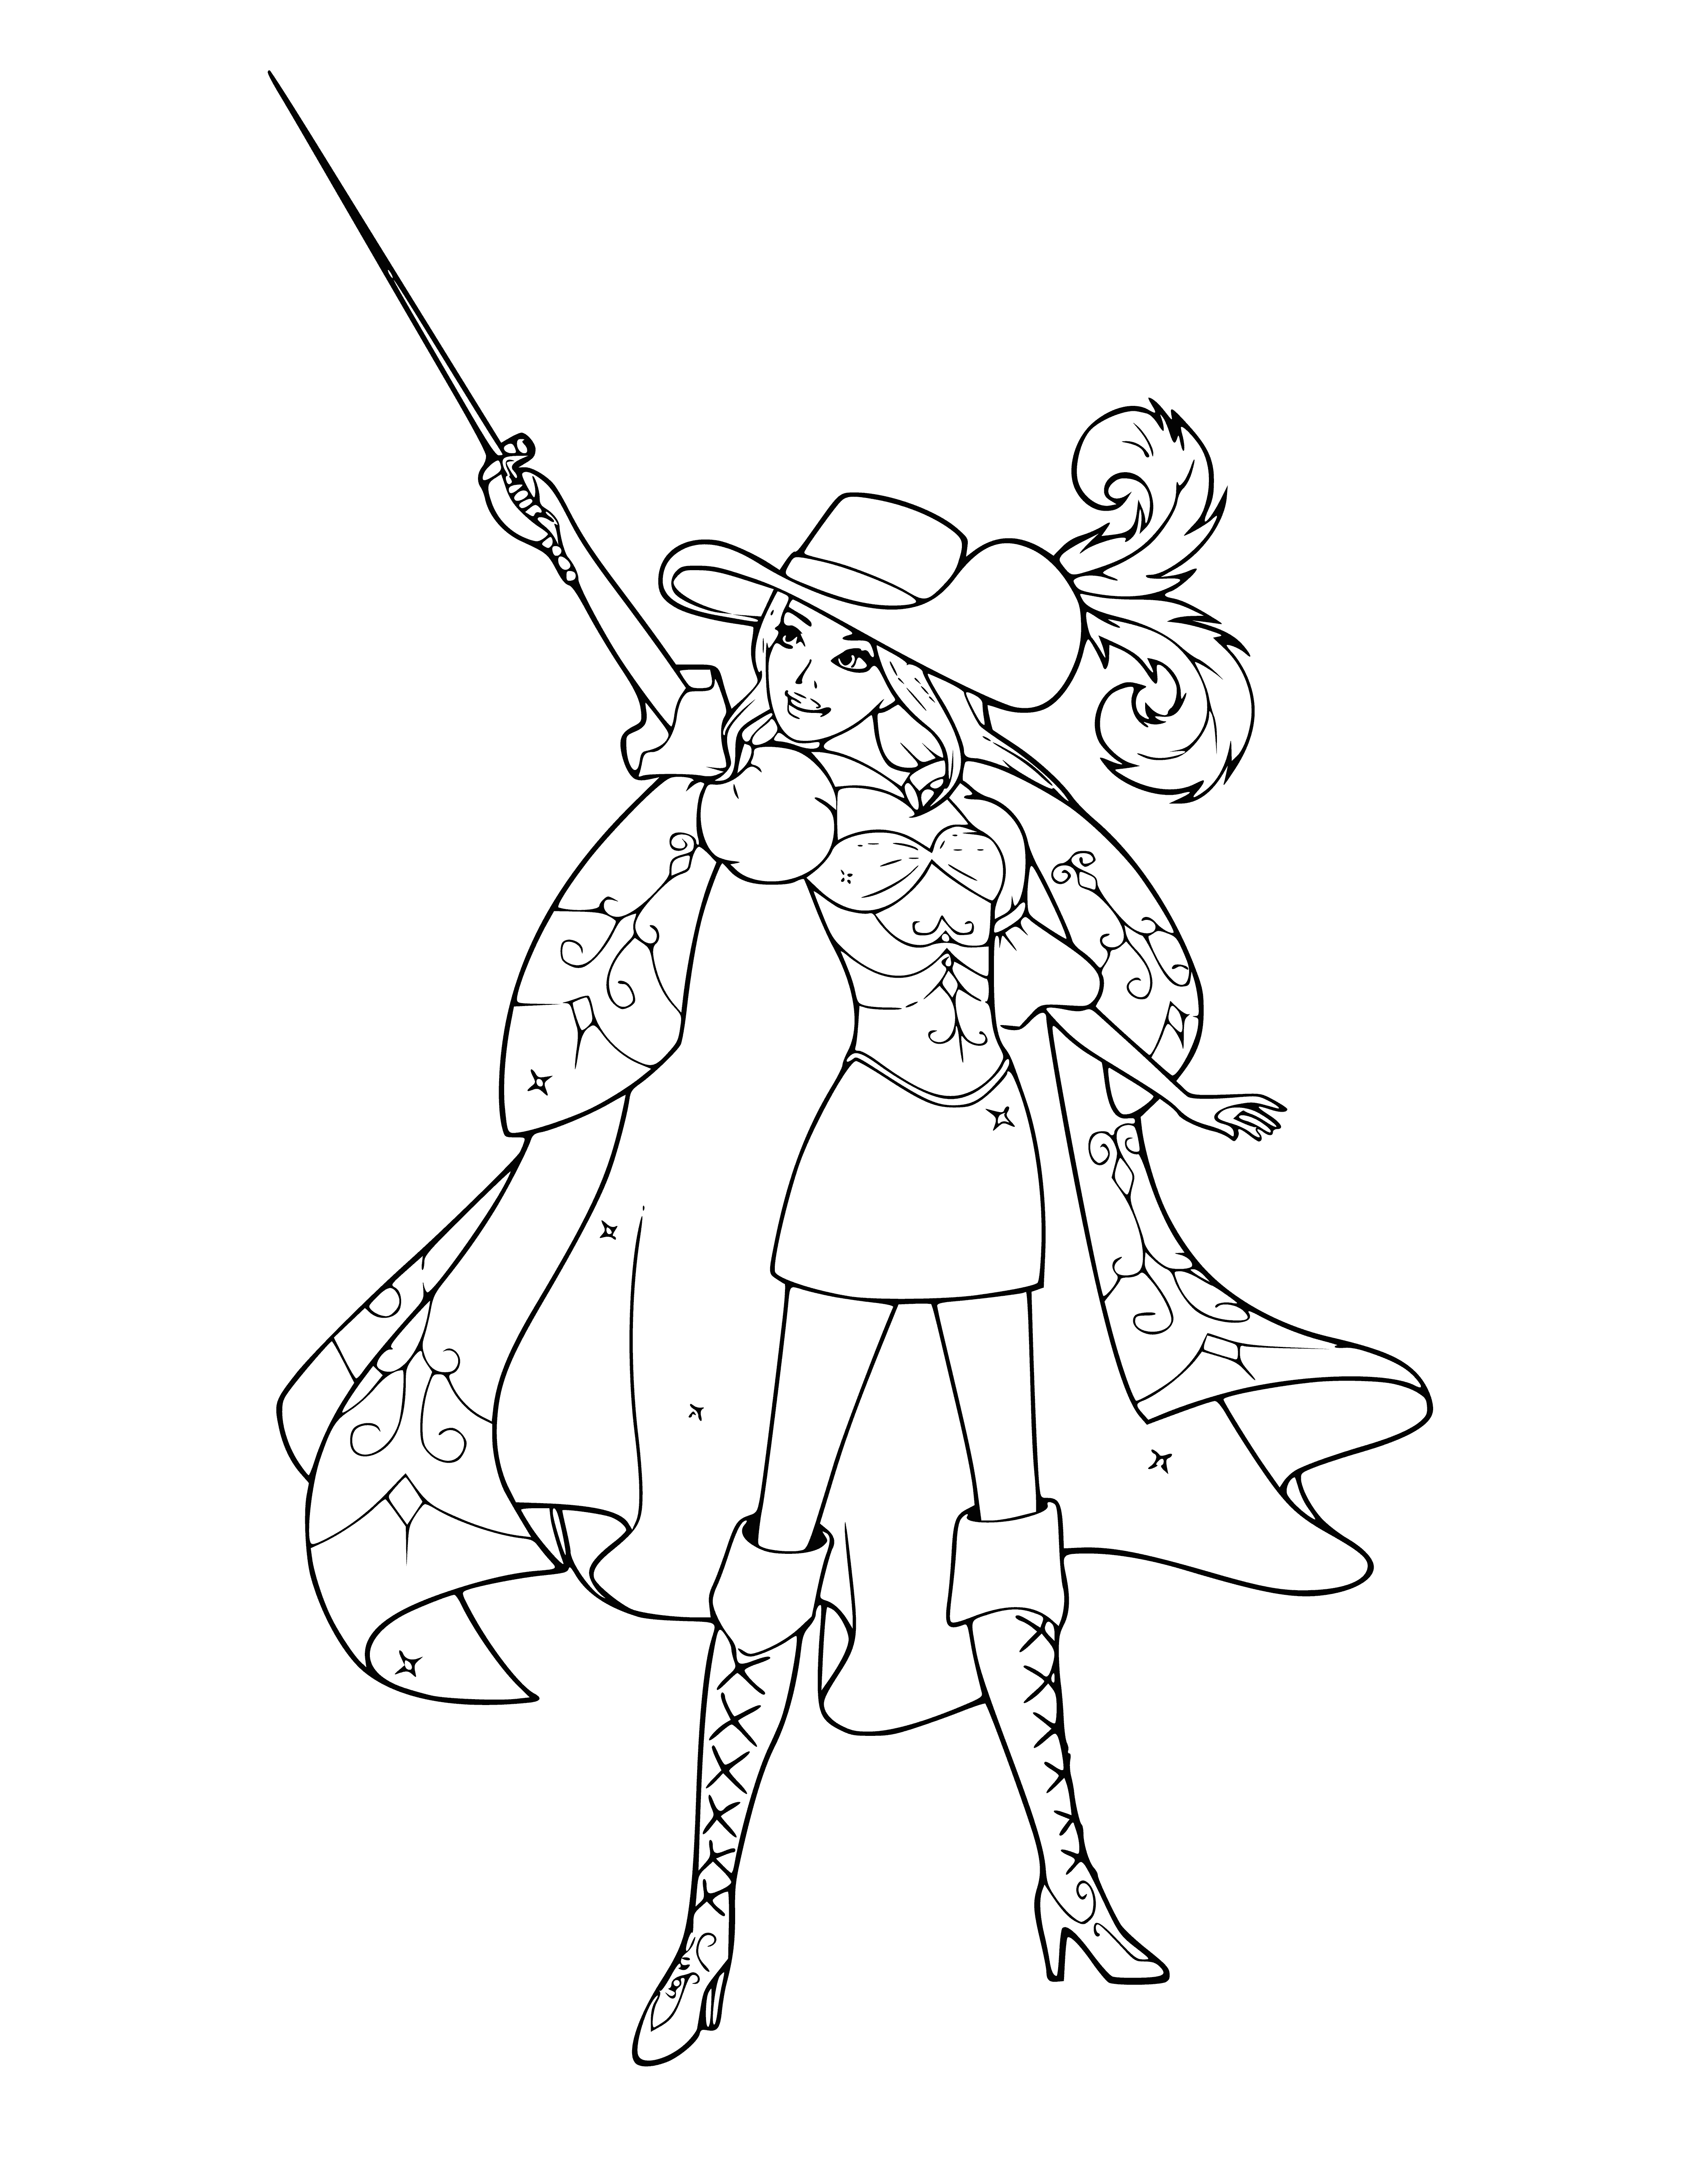 coloring page: Barbie dressed as a musketeer with a white shirt, blue vest, red cape, black hat and a sword in her hand. #coloringpage #barbie